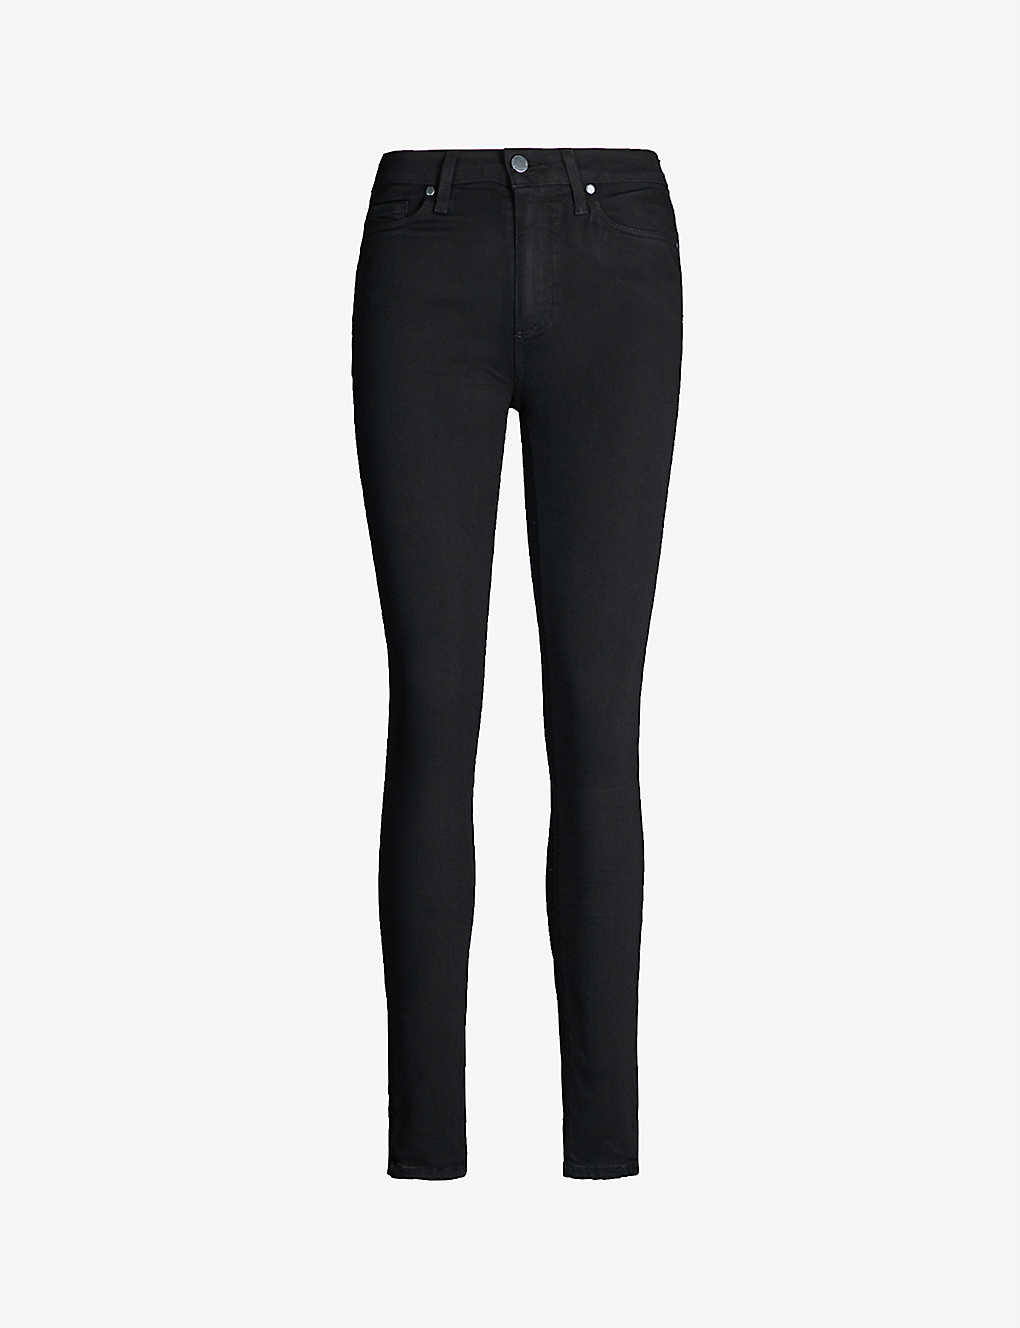 Shop Paige Womens Black Shadow Hoxton Skinny Mid-rise Jeans